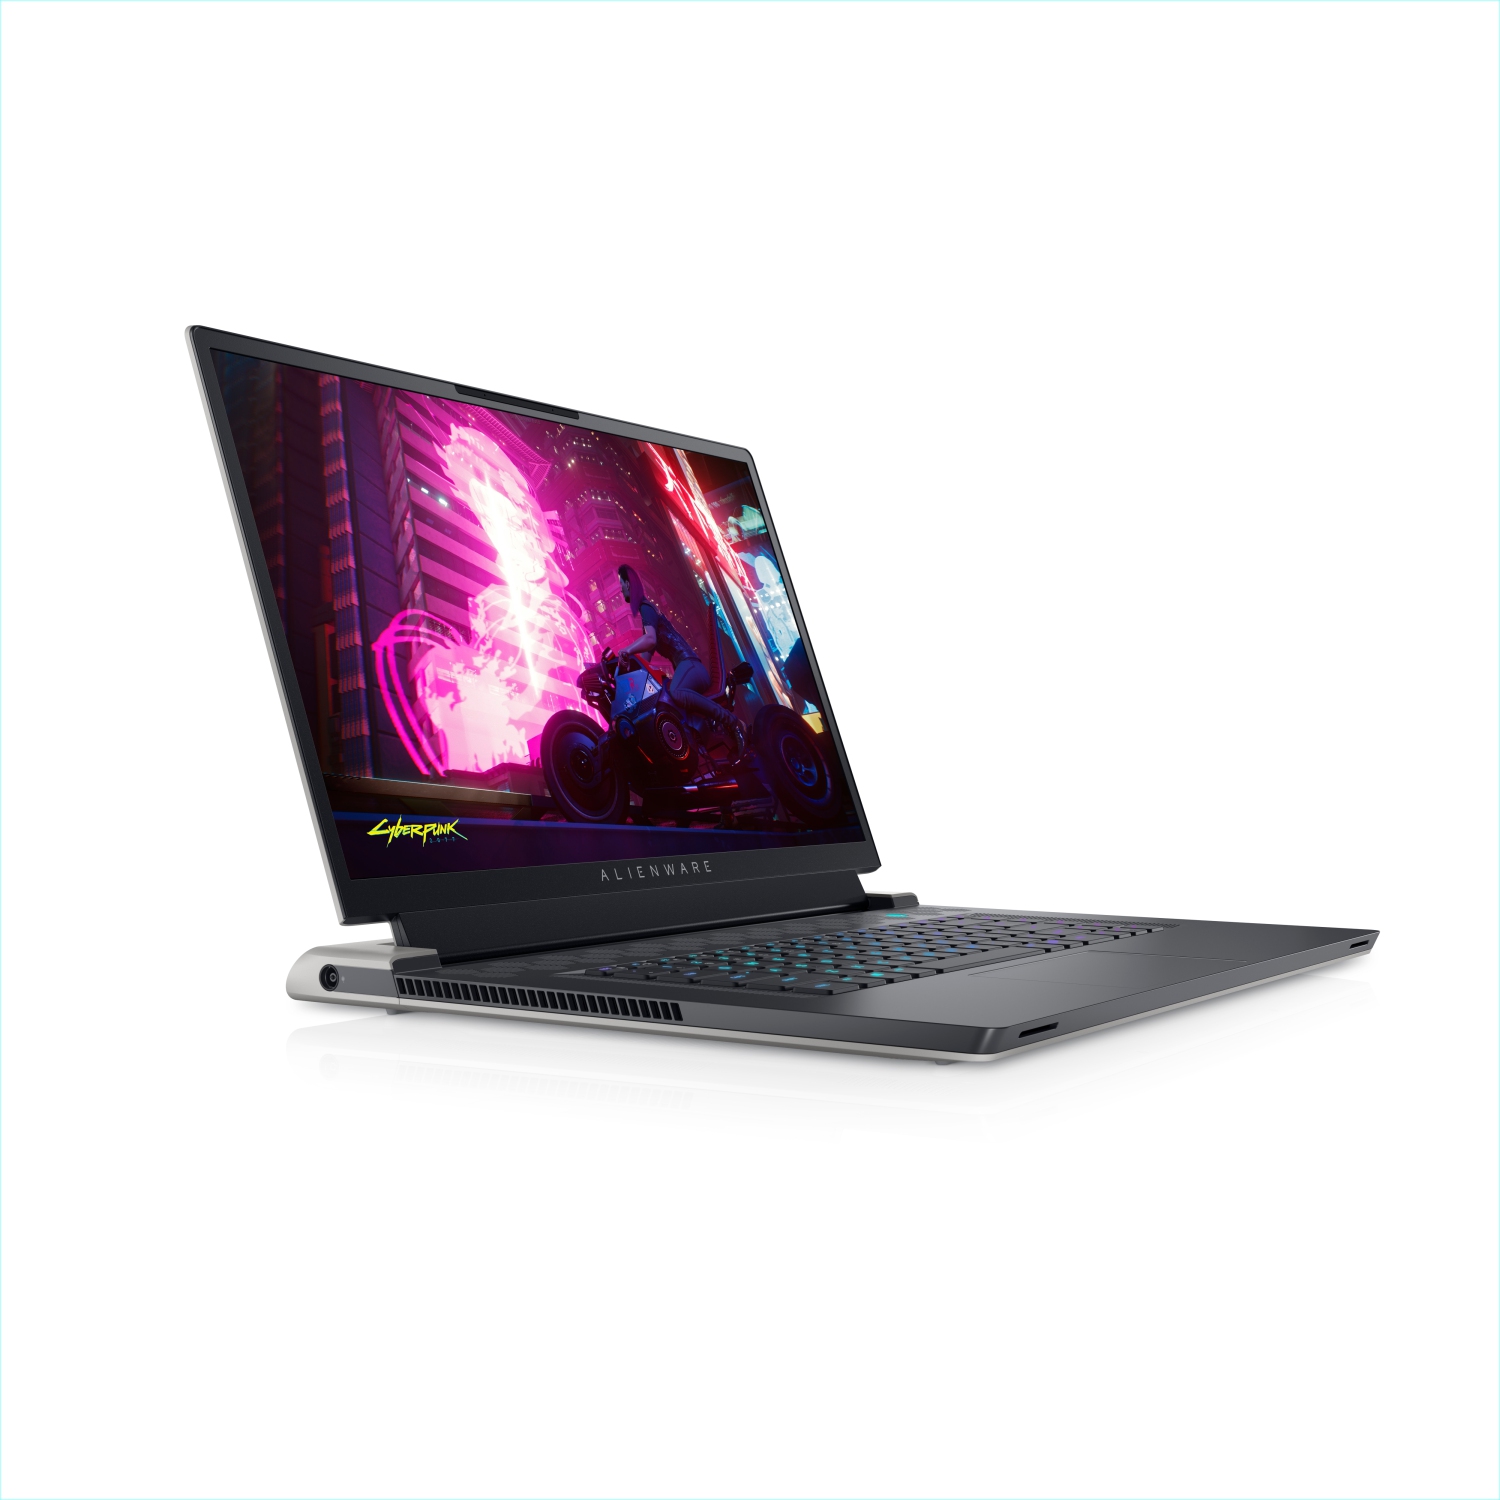 Refurbished (Excellent) - Dell Alienware X17 R1 Gaming Laptop (2021), 17.3" FHD, Core i7, 512GB SSD, 32GB RAM, RTX 3060, 8 Cores @ 4.6 GHz, 11th Gen CPU Certified